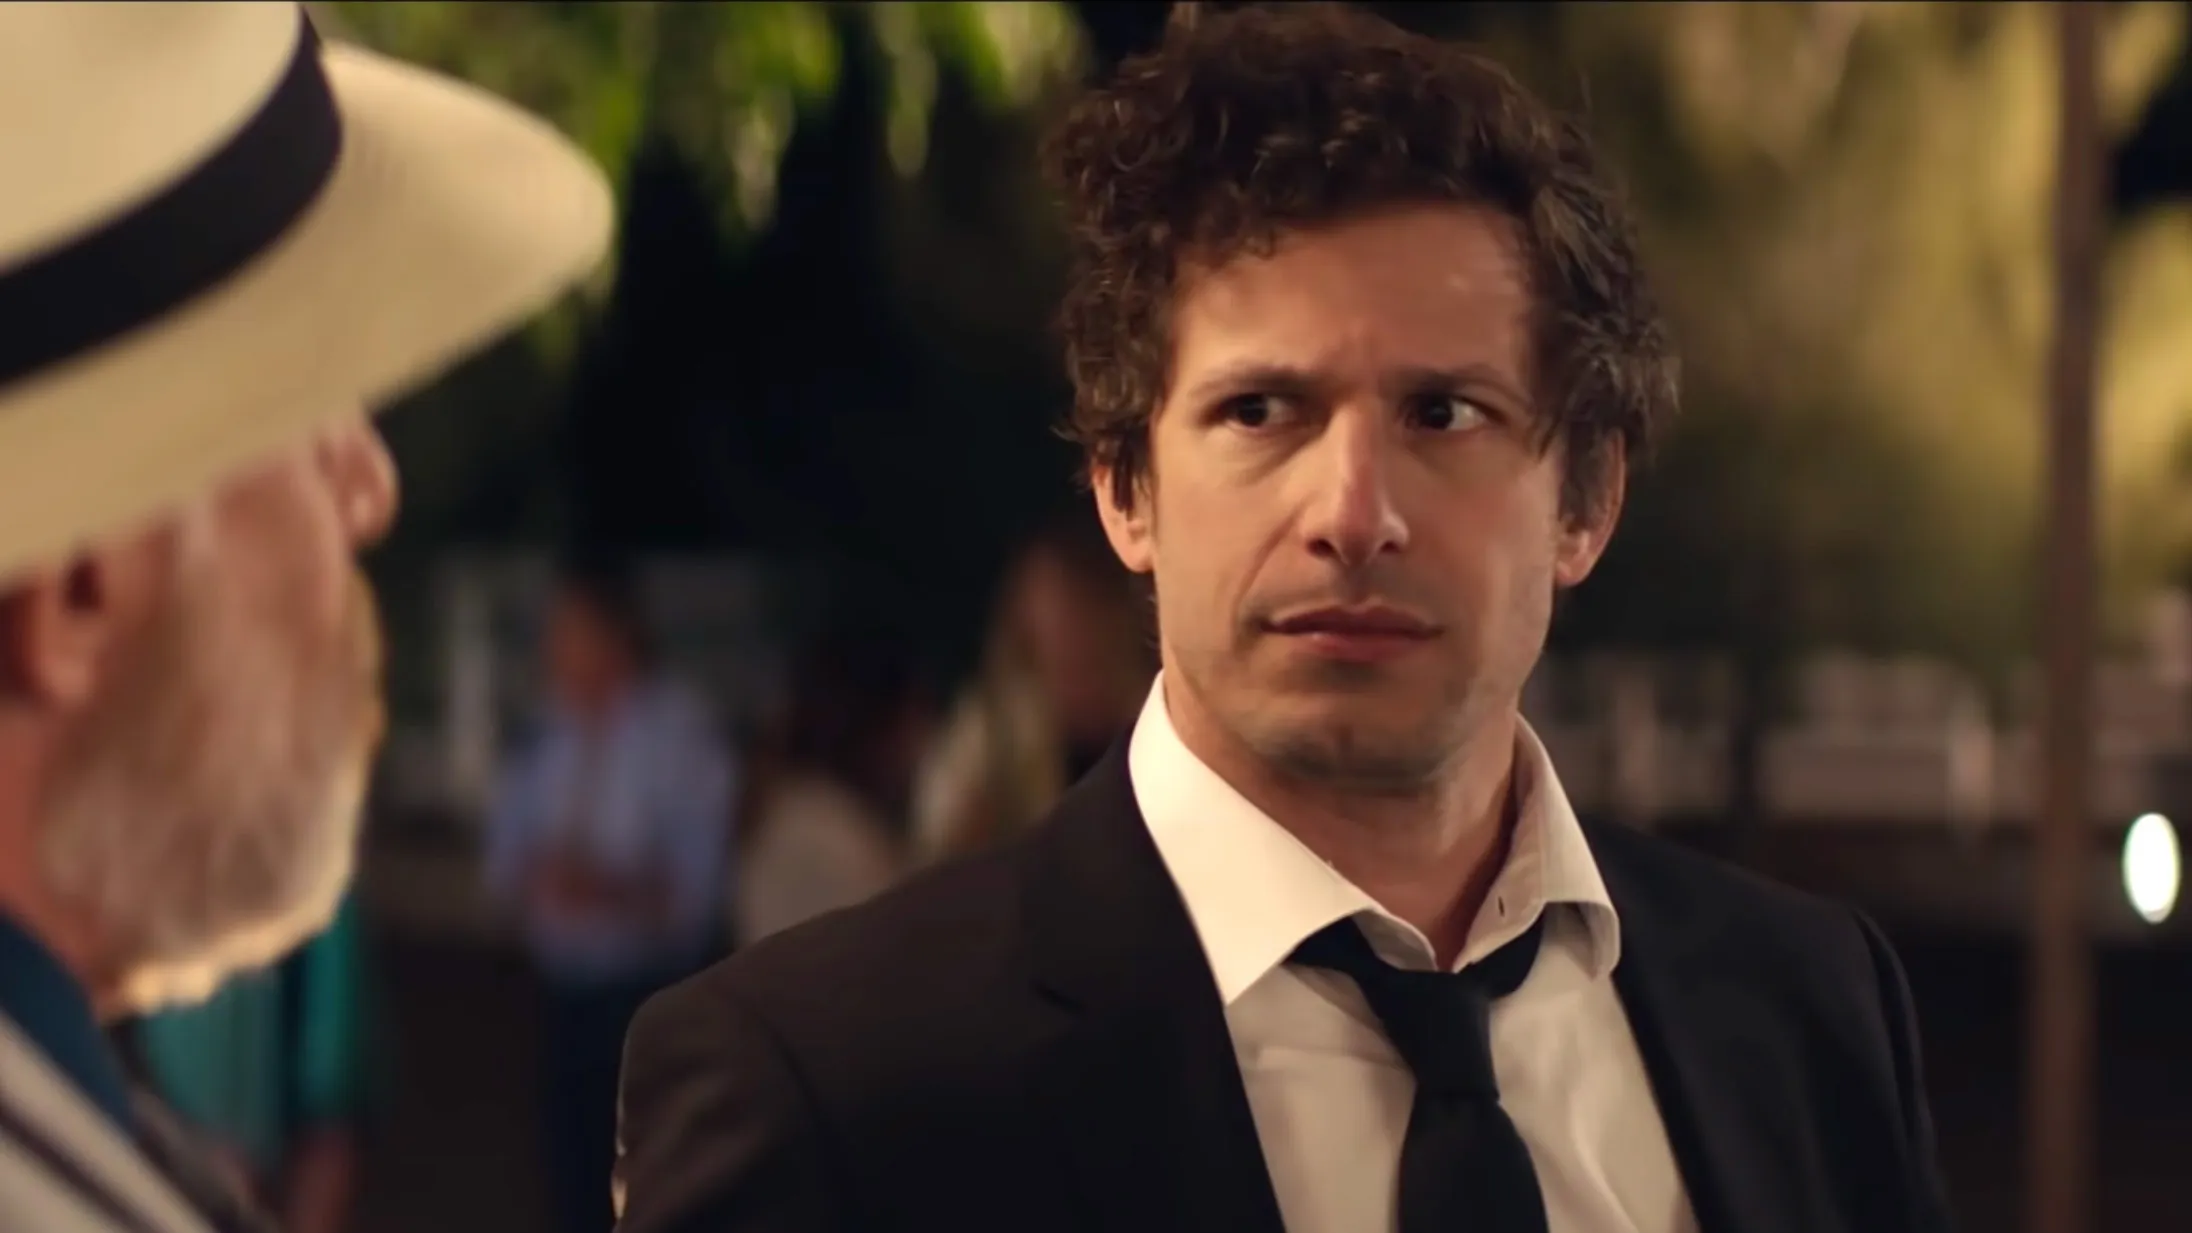 An under-marketed Hulu gem sparks the question why doesn’t Andy Samberg have more hits?